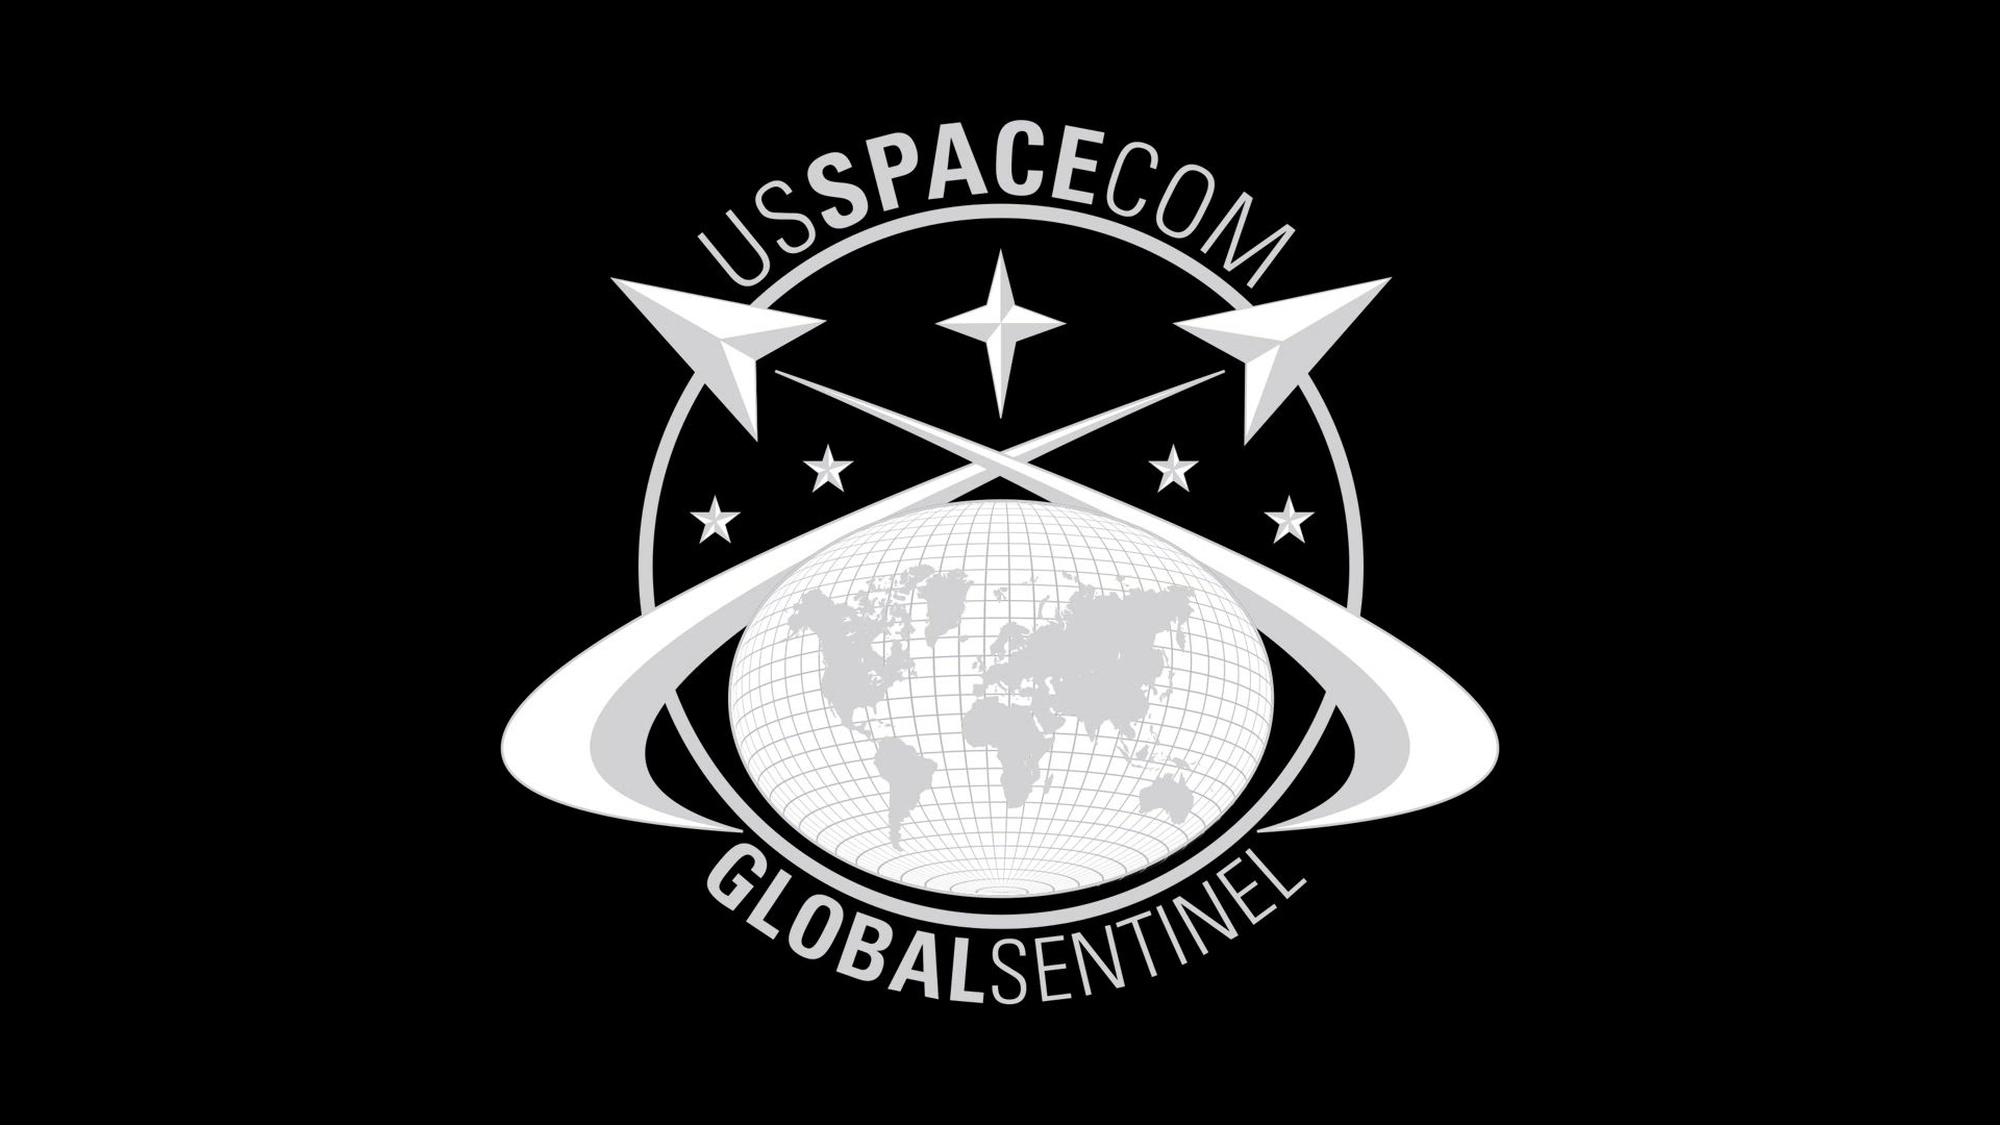 A Global Sentinel 2024 logo featuring a globe, stars and curved arrows rendered in white against a black background.